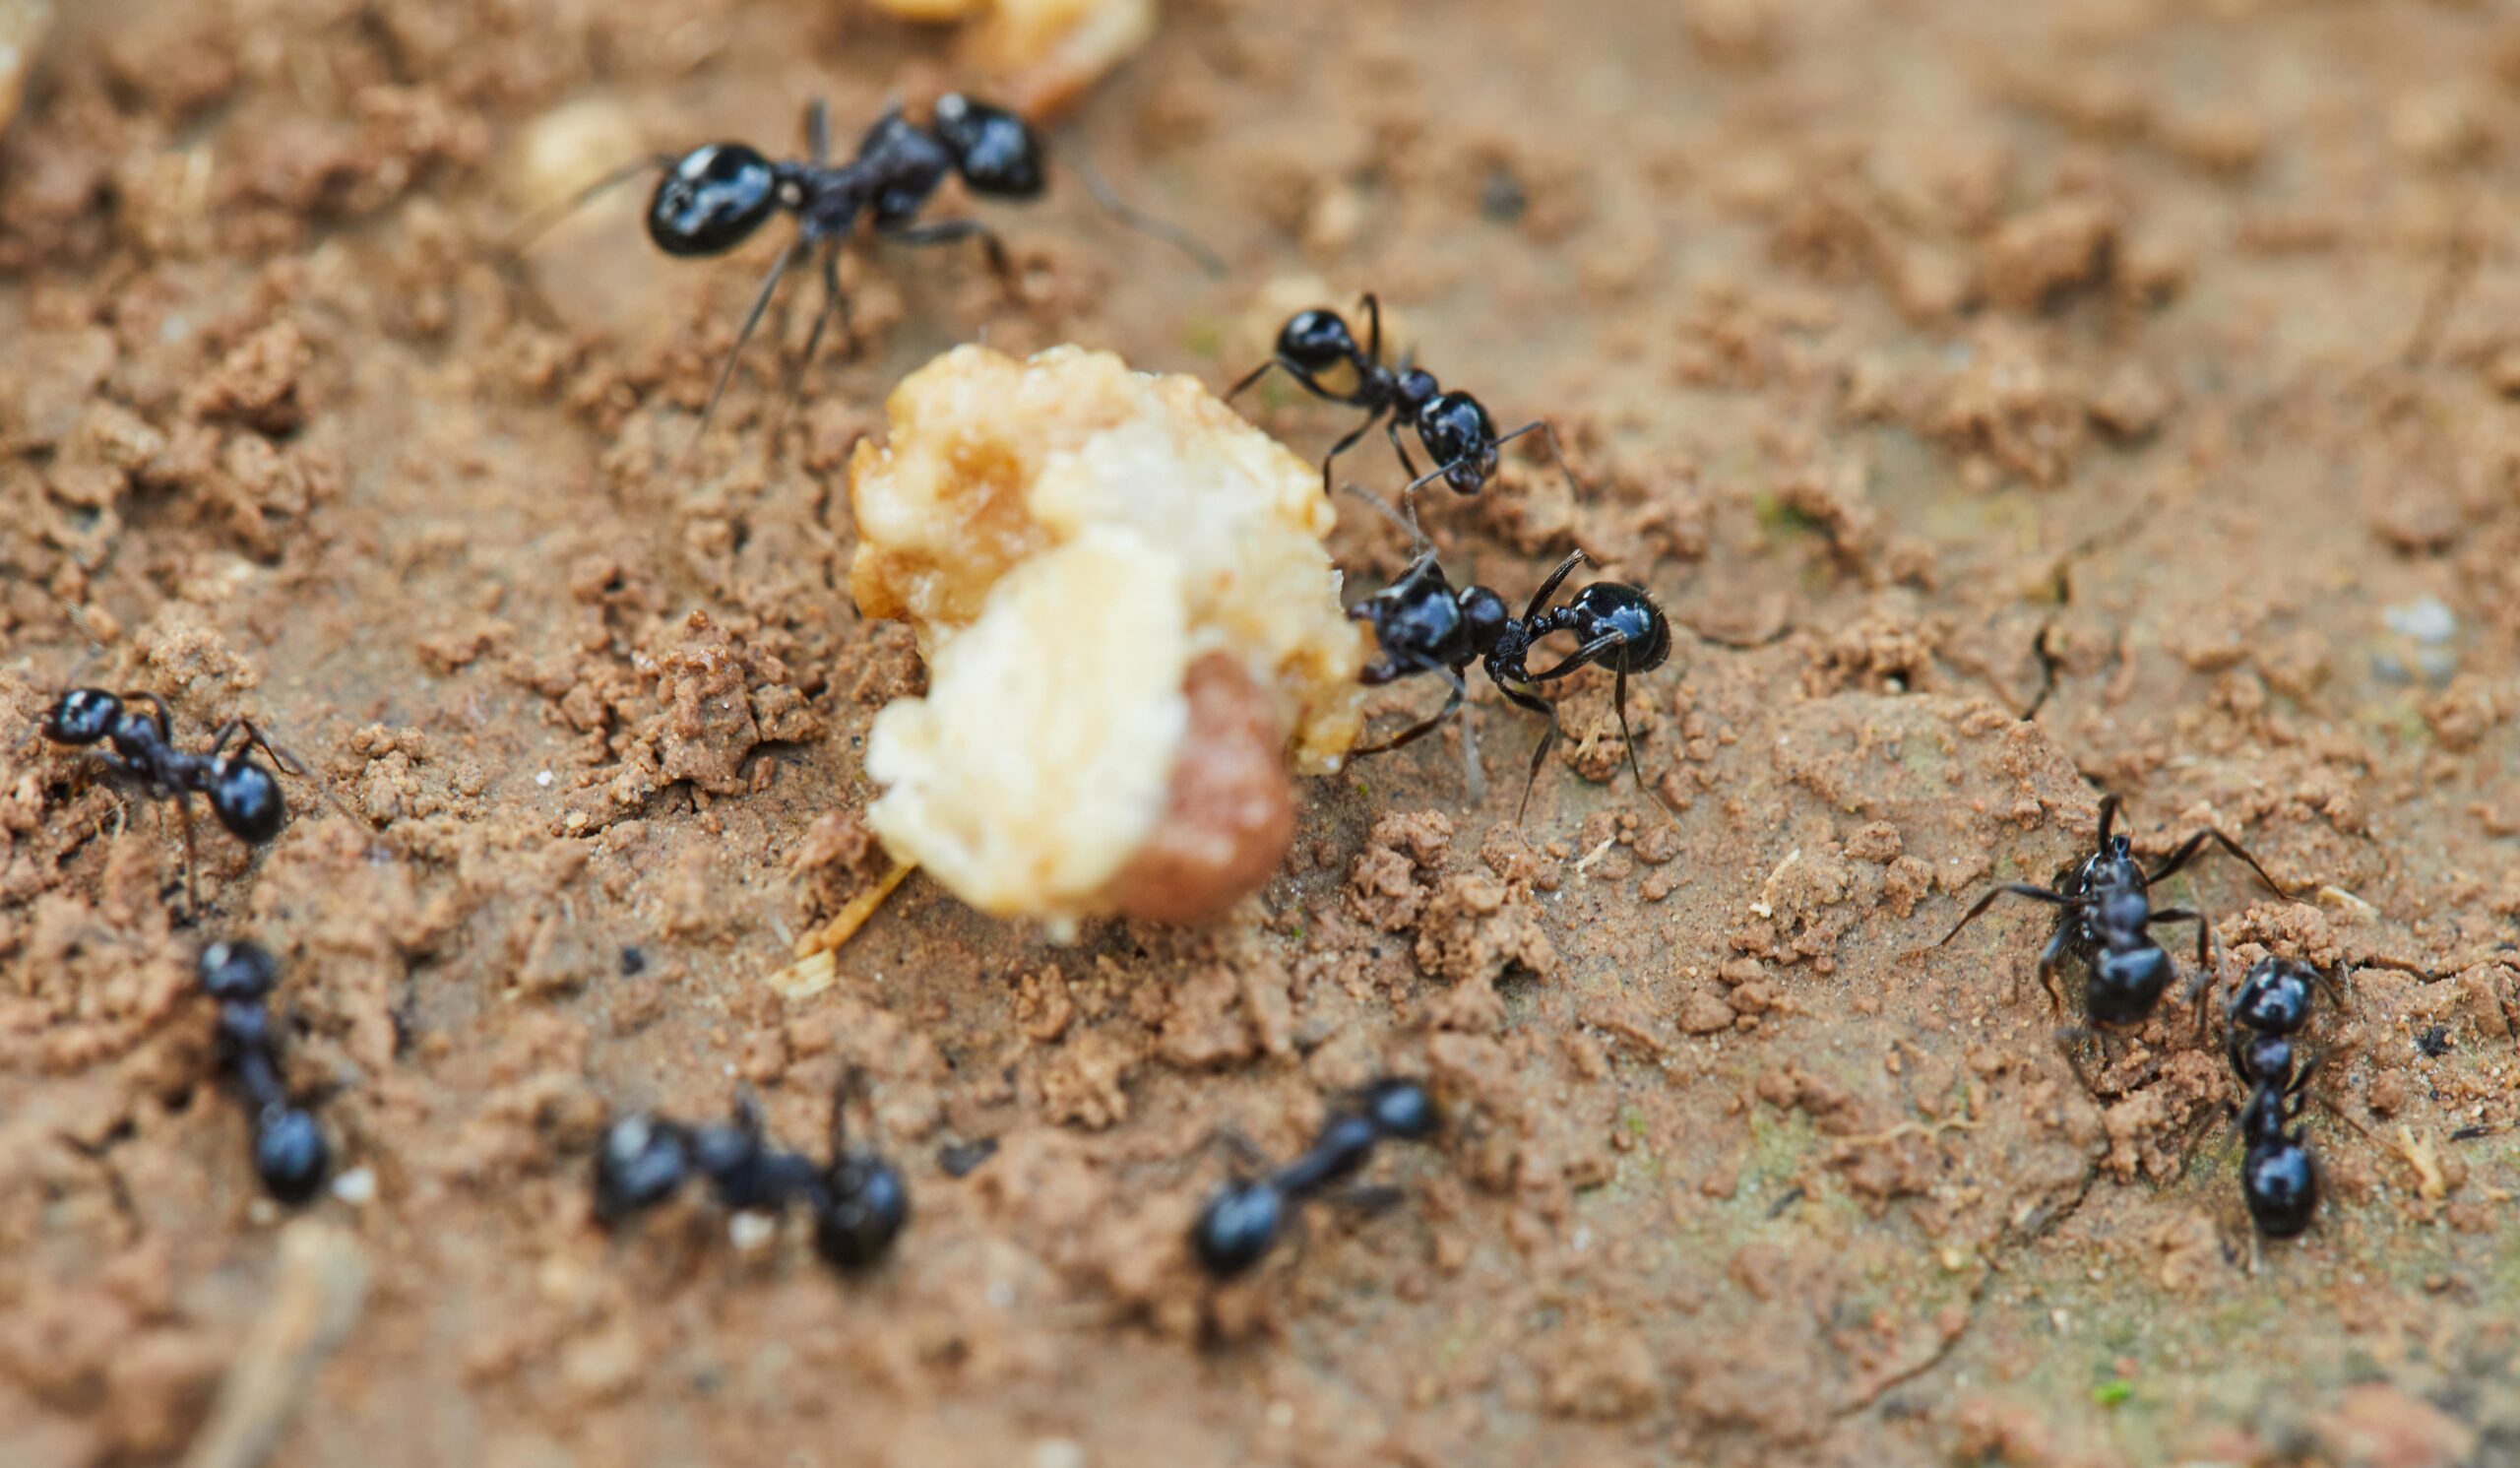 ants-around-prey-are-trying-to-drag-into-their-hom-min